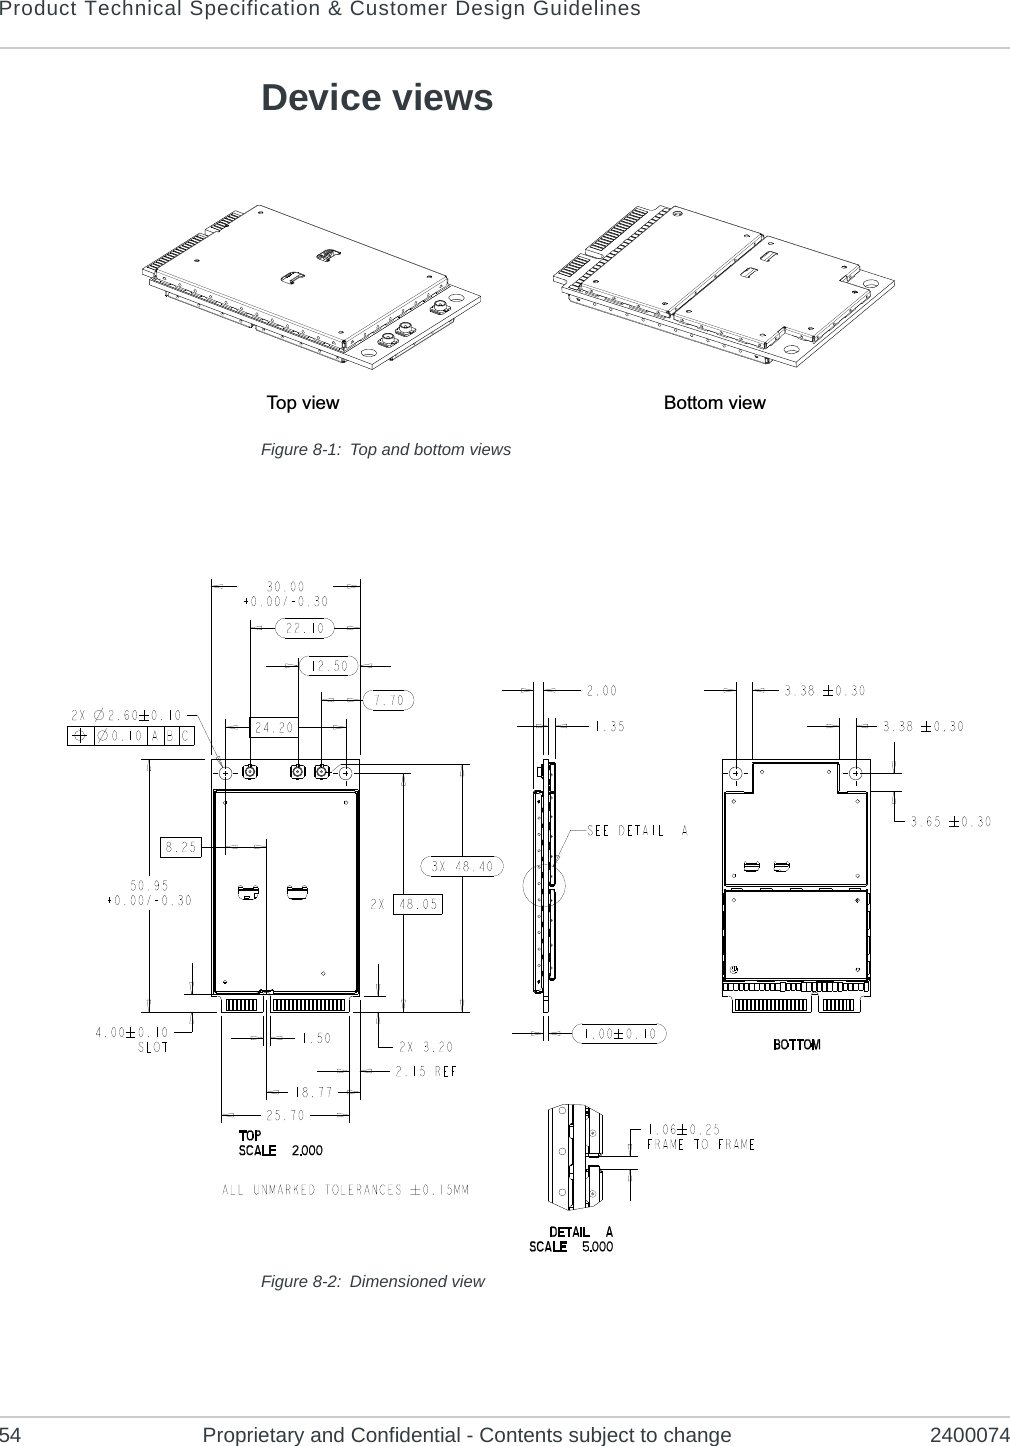 Product Technical Specification &amp; Customer Design Guidelines54 Proprietary and Confidential - Contents subject to change 2400074Device viewsFigure 8-1: Top and bottom viewsFigure 8-2: Dimensioned viewTop view Bottom viewTop view Bottom view